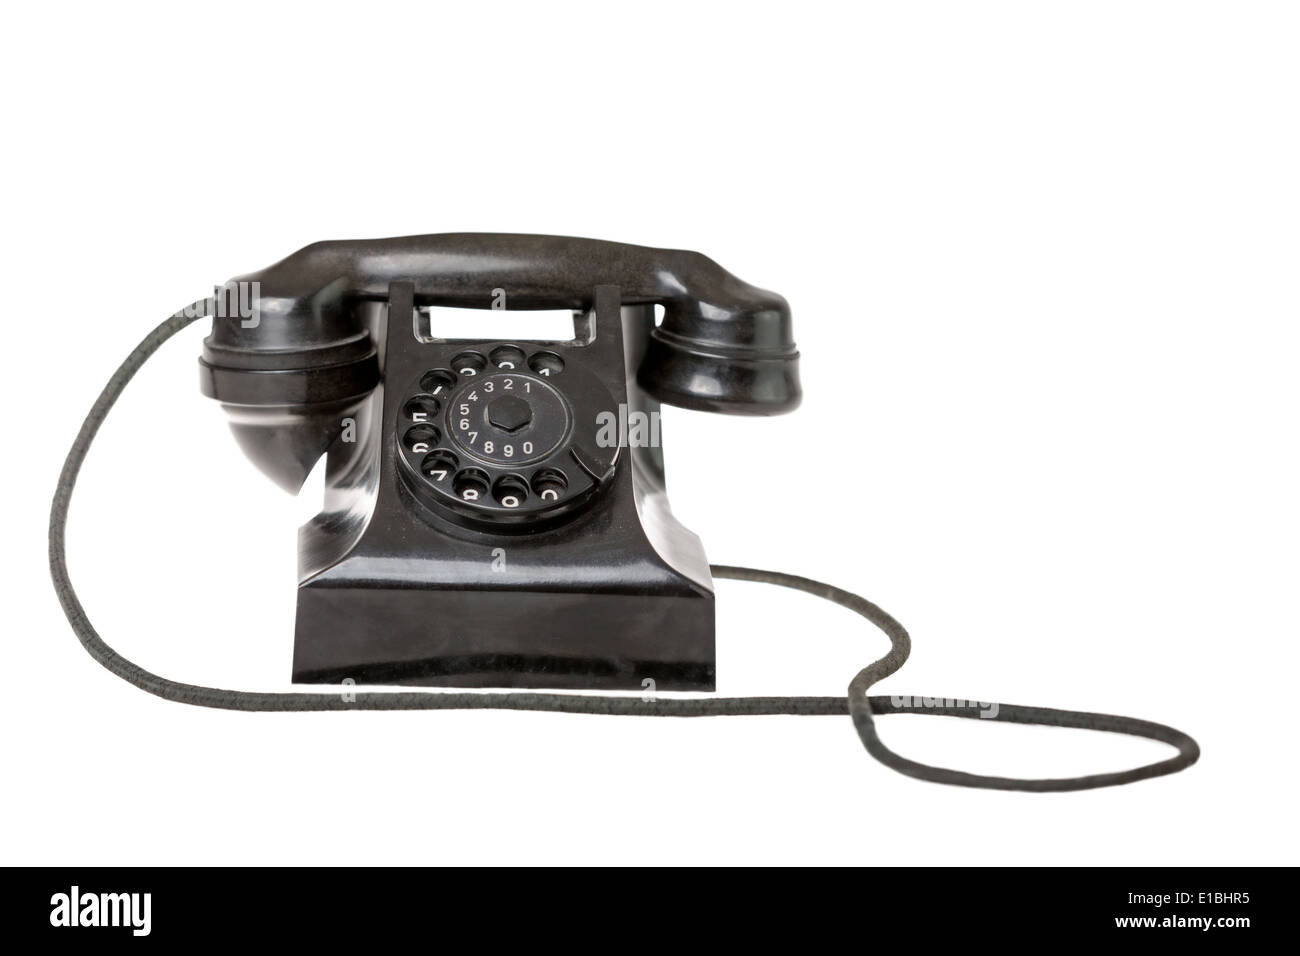 Old-fashioned black rotary telephone instrument with its handset on the cradle on white background with copy space Stock Photo